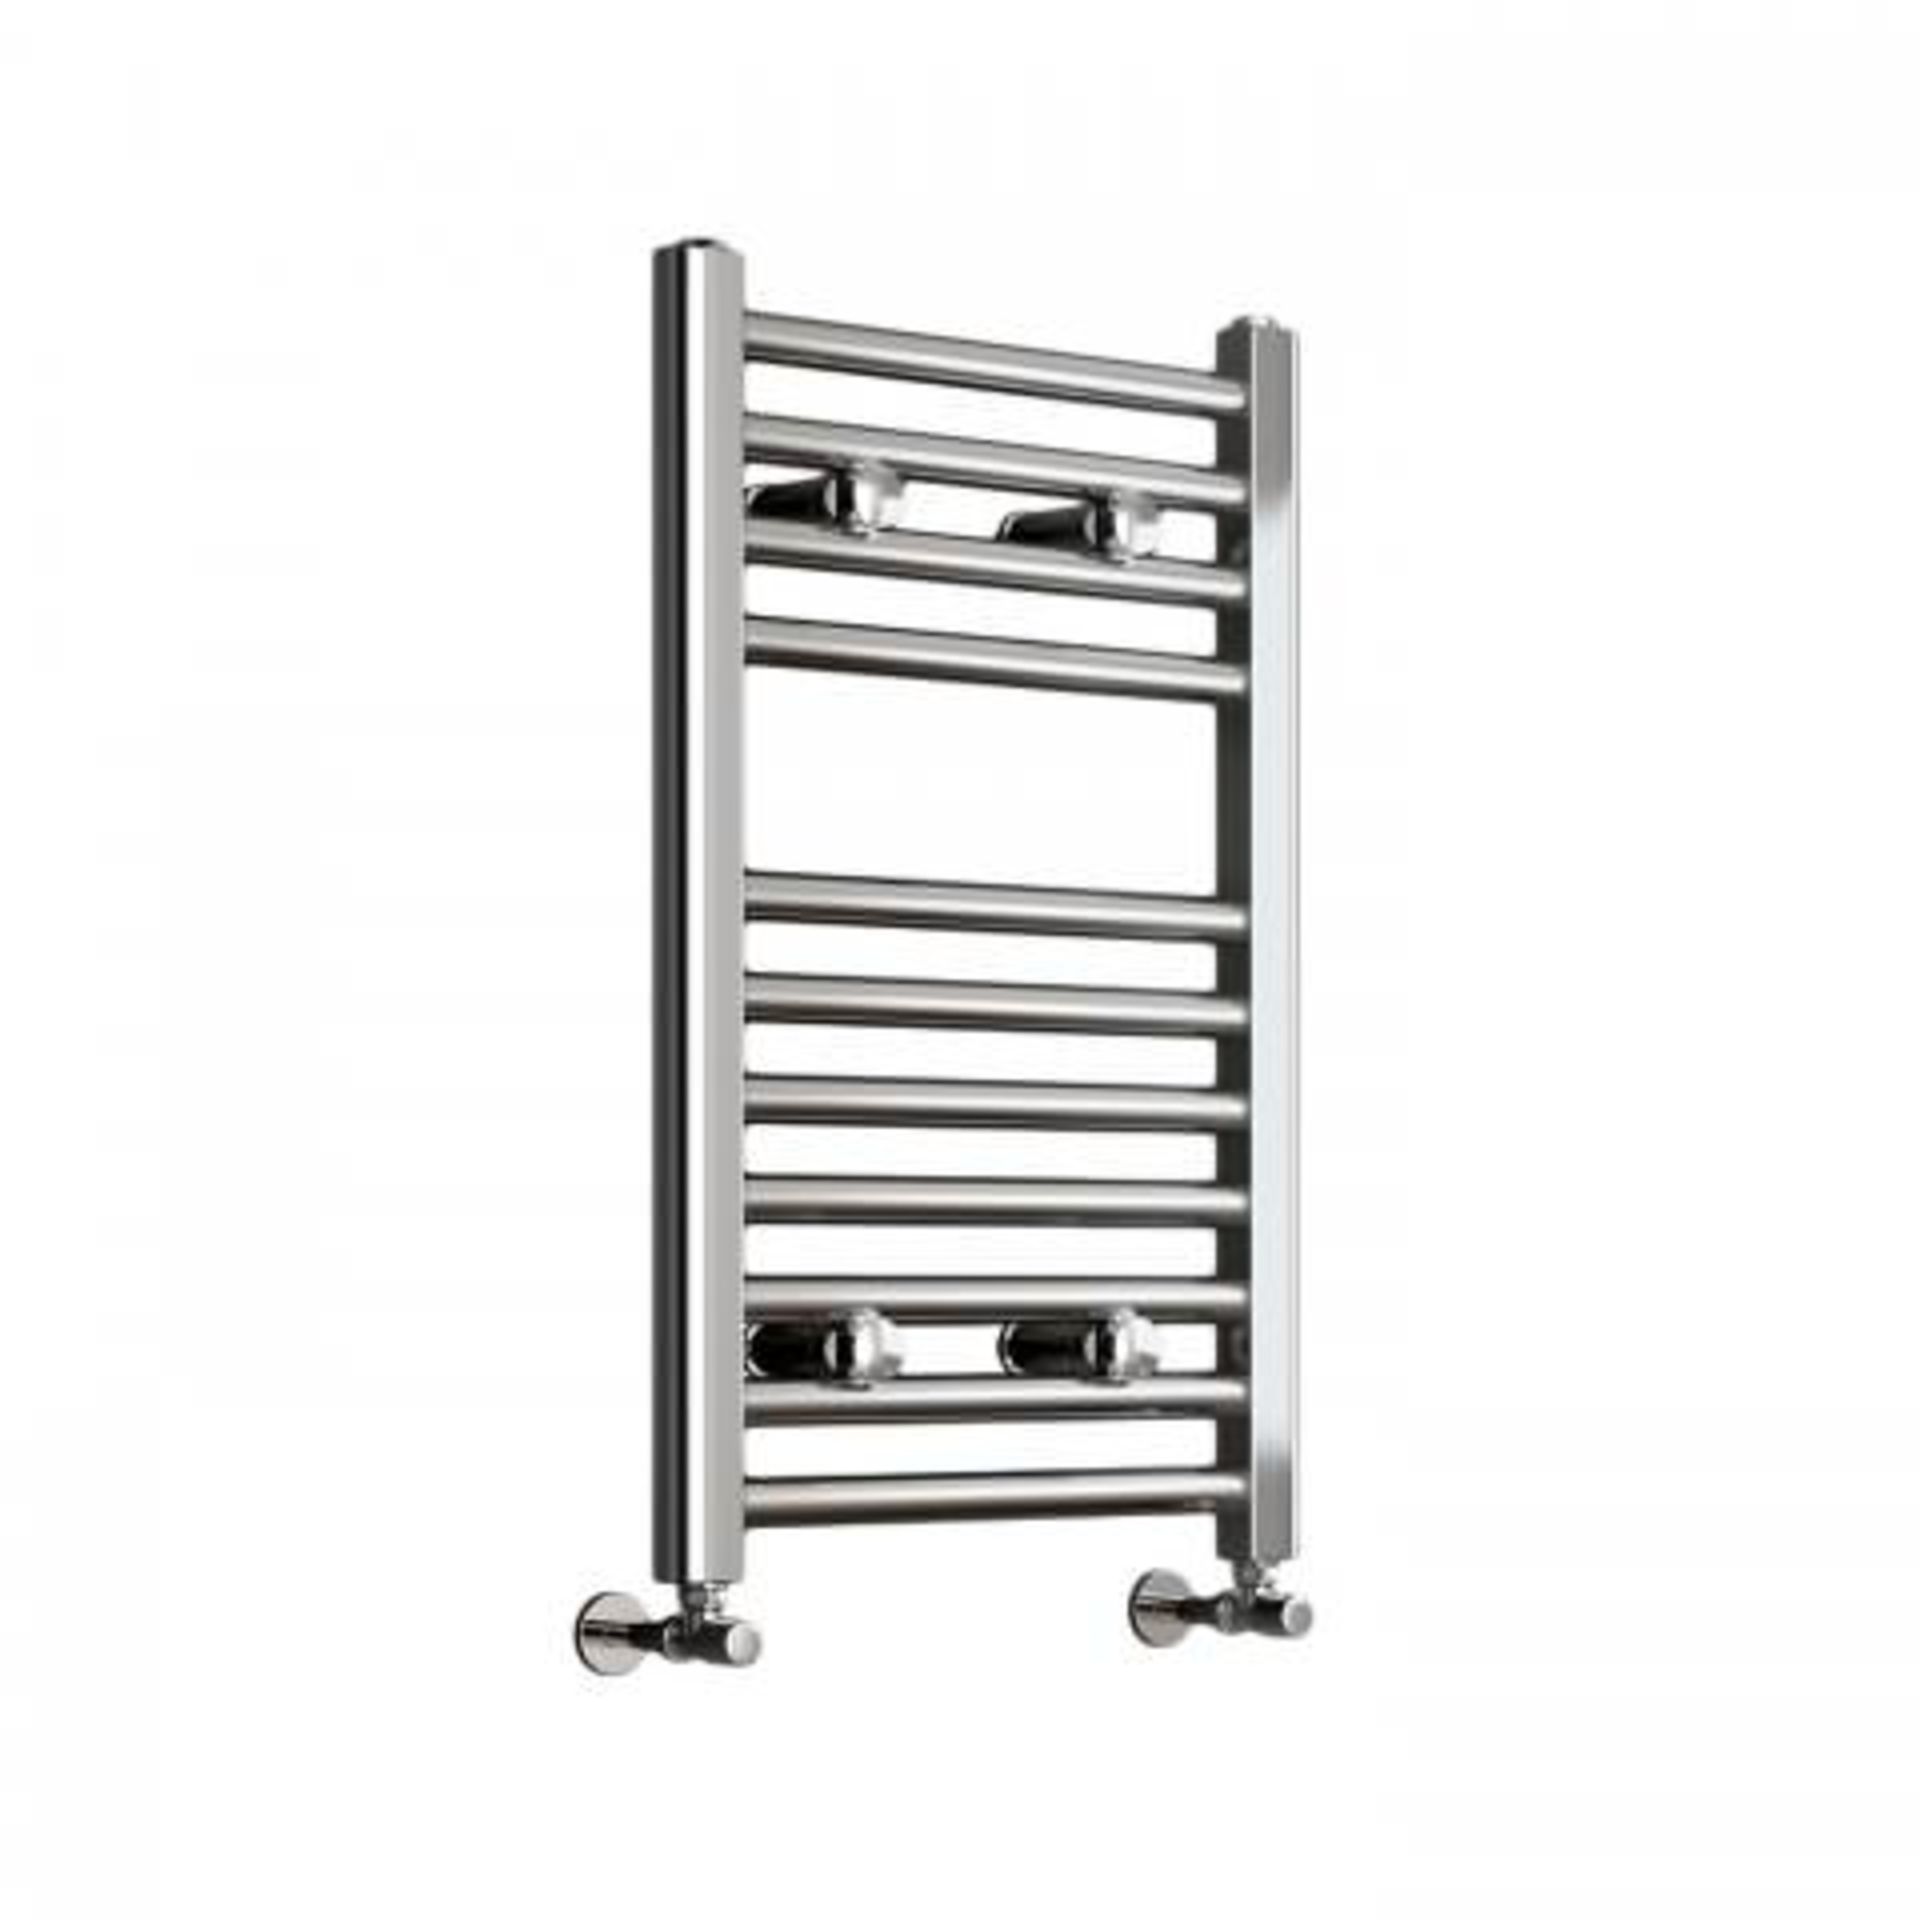 (I81) 650x400mm - 25mm Tubes - Chrome Heated Straight Rail Ladder Towel Radiator Benefit from the - Image 3 of 3